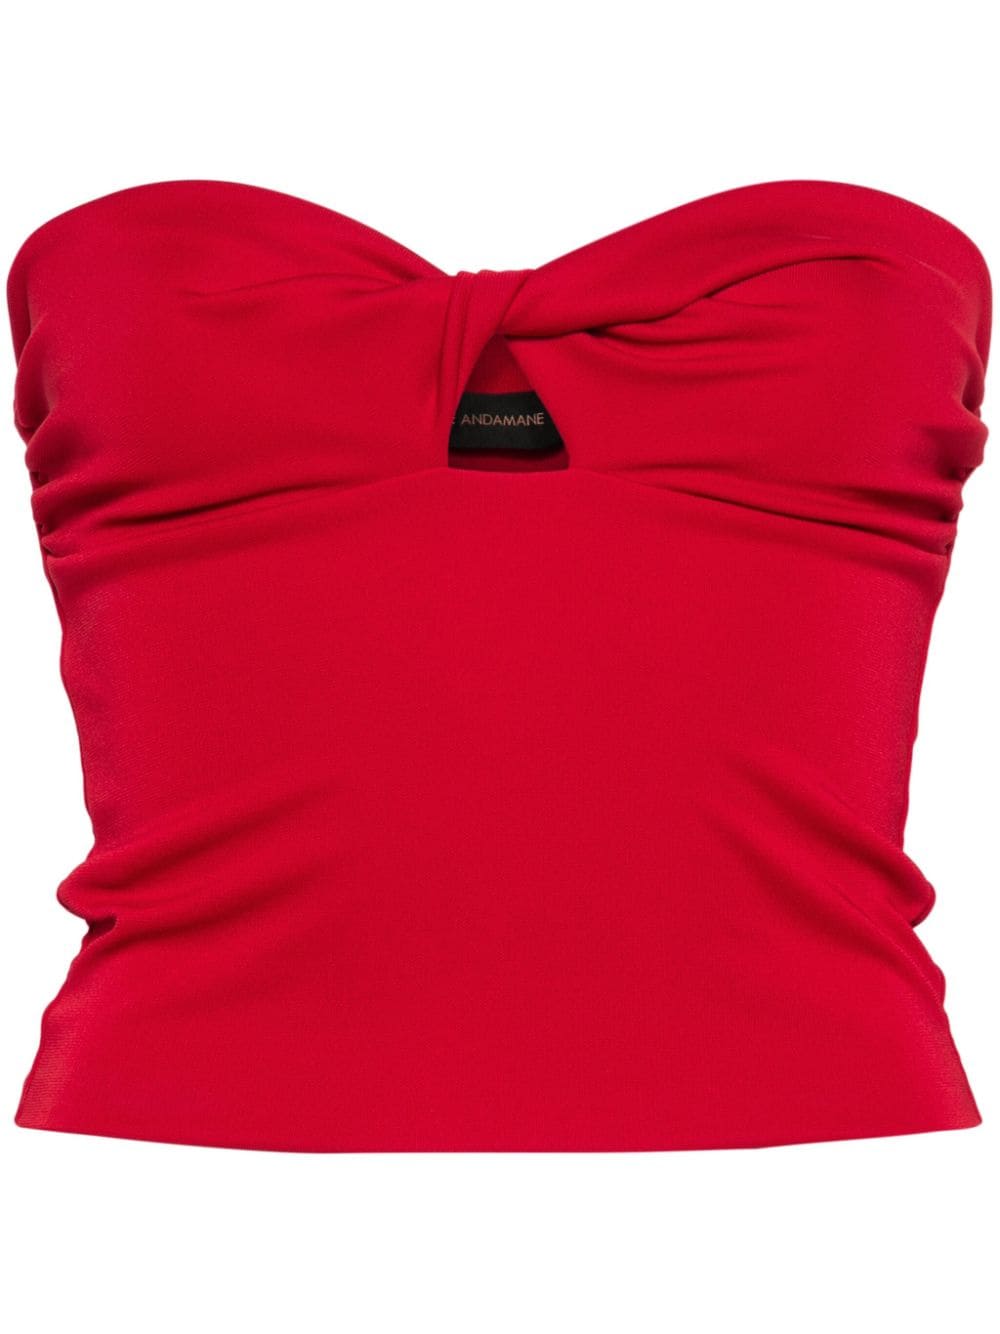 Lucille strapless top